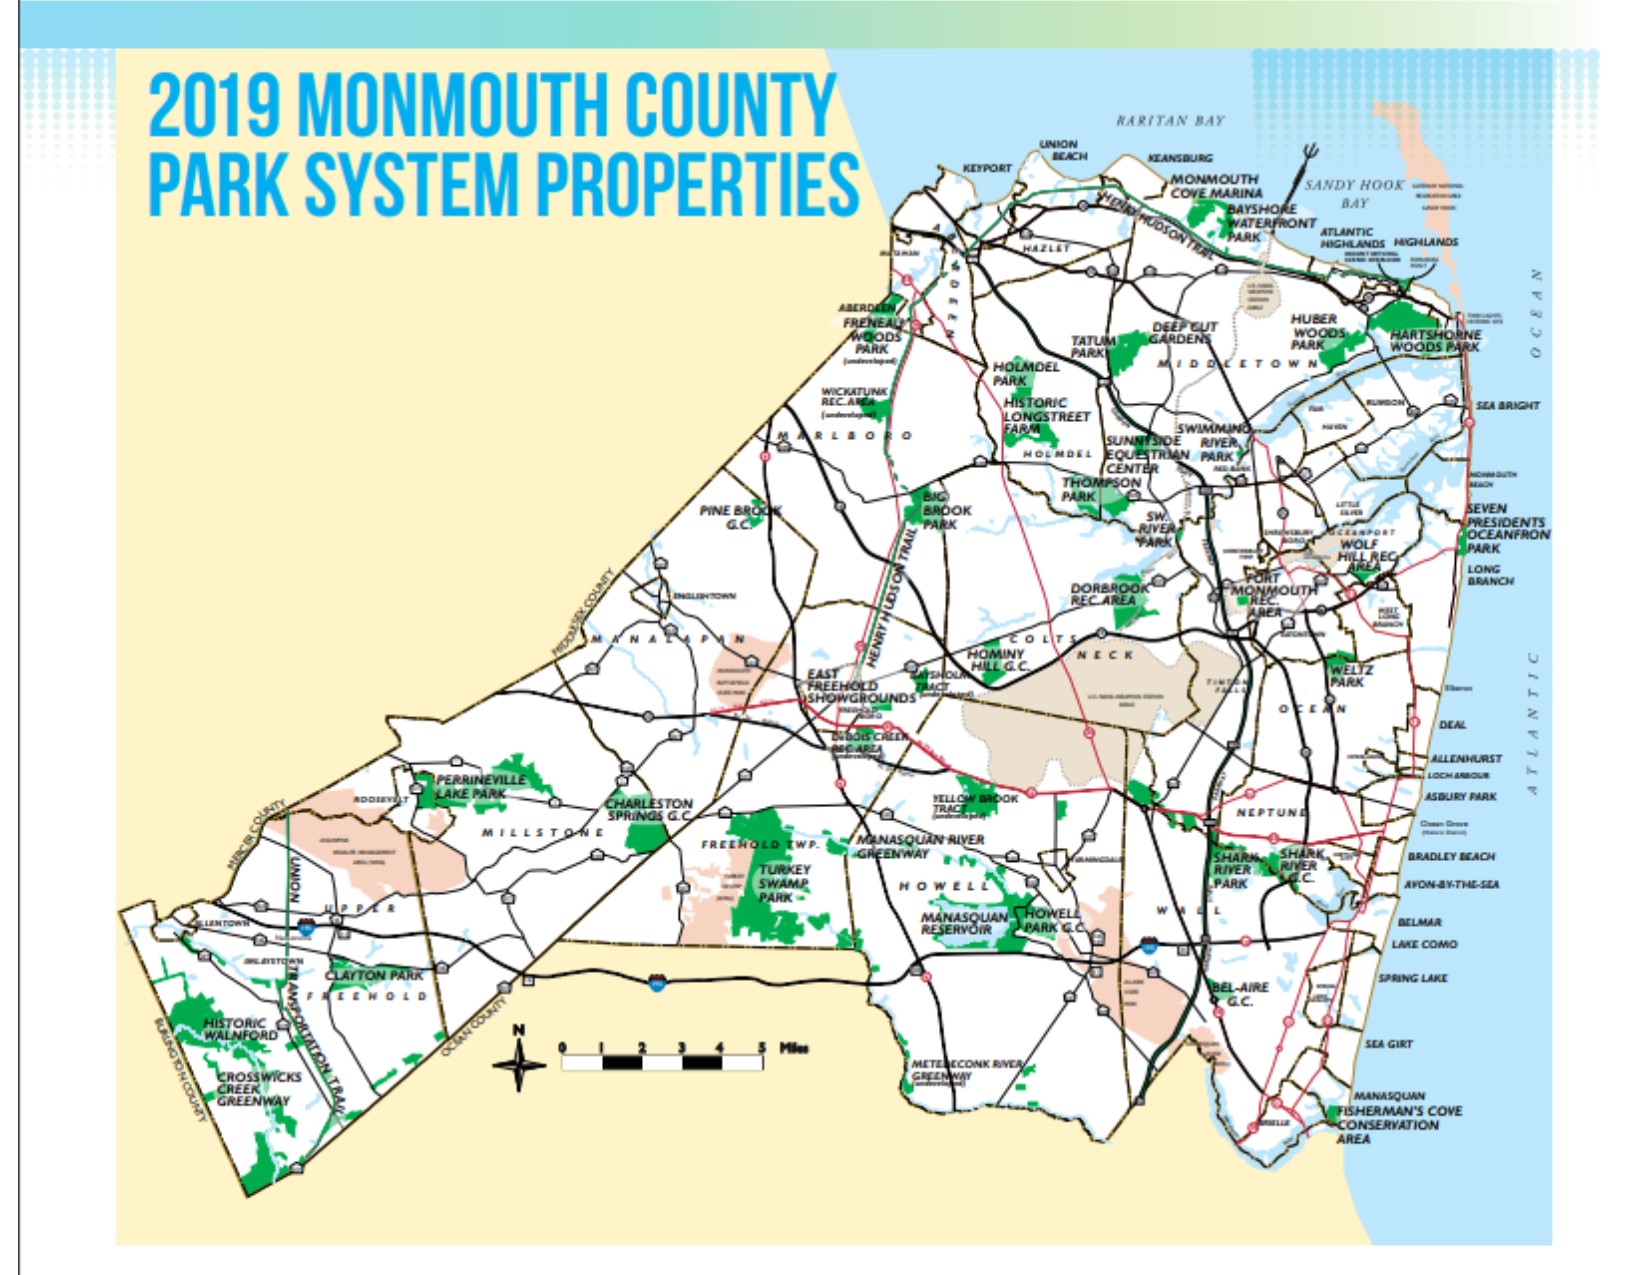 Monmouth County Park System Properties